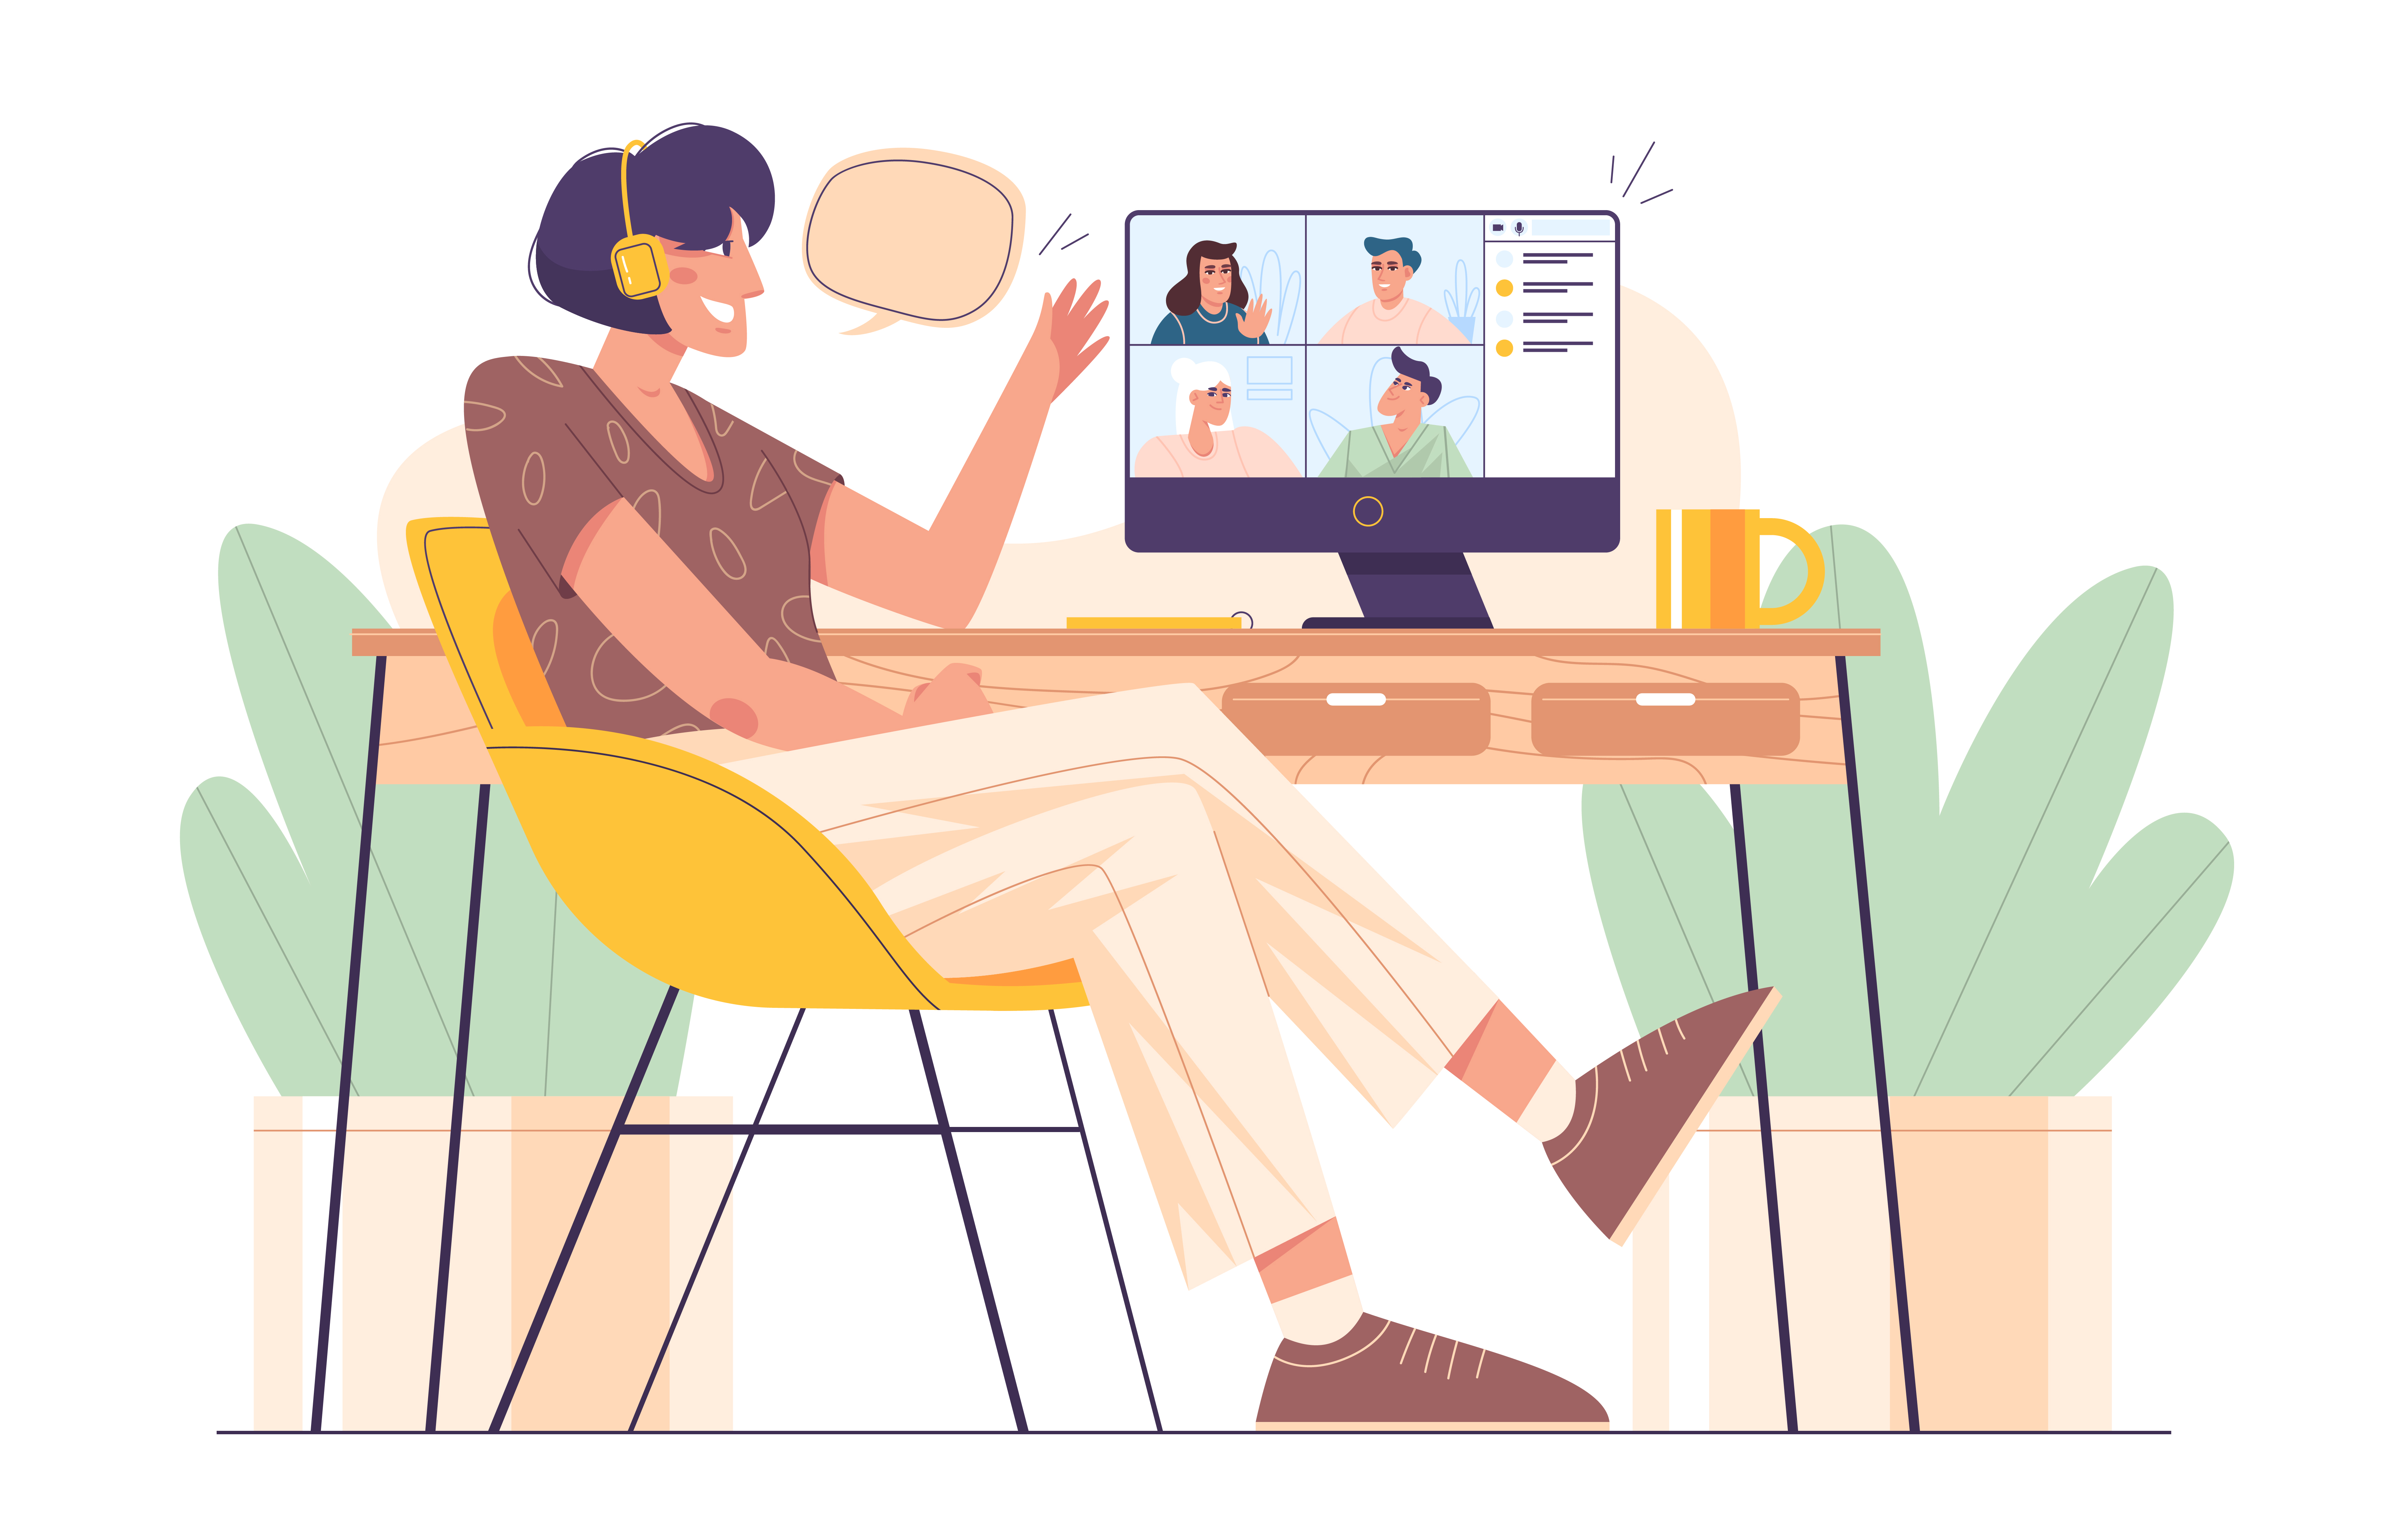  Remote team: My experience and learning